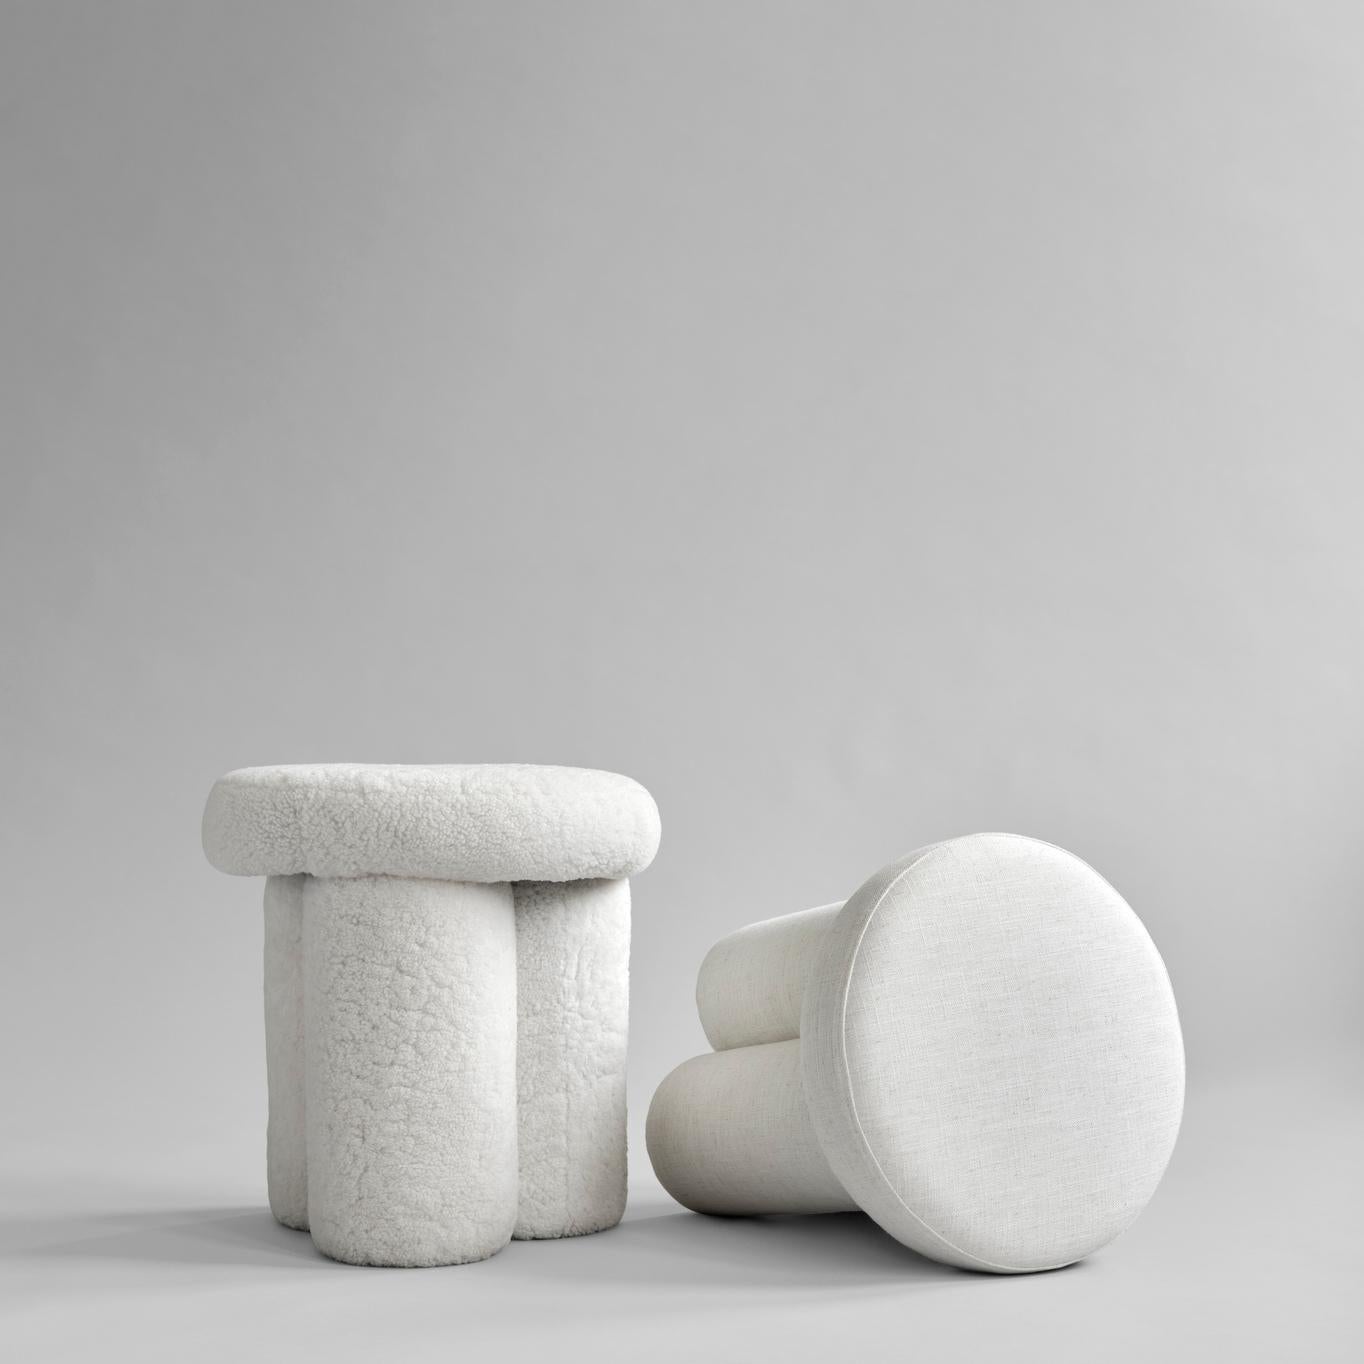 Linen big foot stool by 101 Copenhagen
Designed by Kristian Sofus Hansen & Tommy Hyldahl
Dimensions: L 38 / W 38 /H 43 CM
Materials: Linen

A quirky and contemporary addition to any interior setting and family alike, the Big Foot Stool is